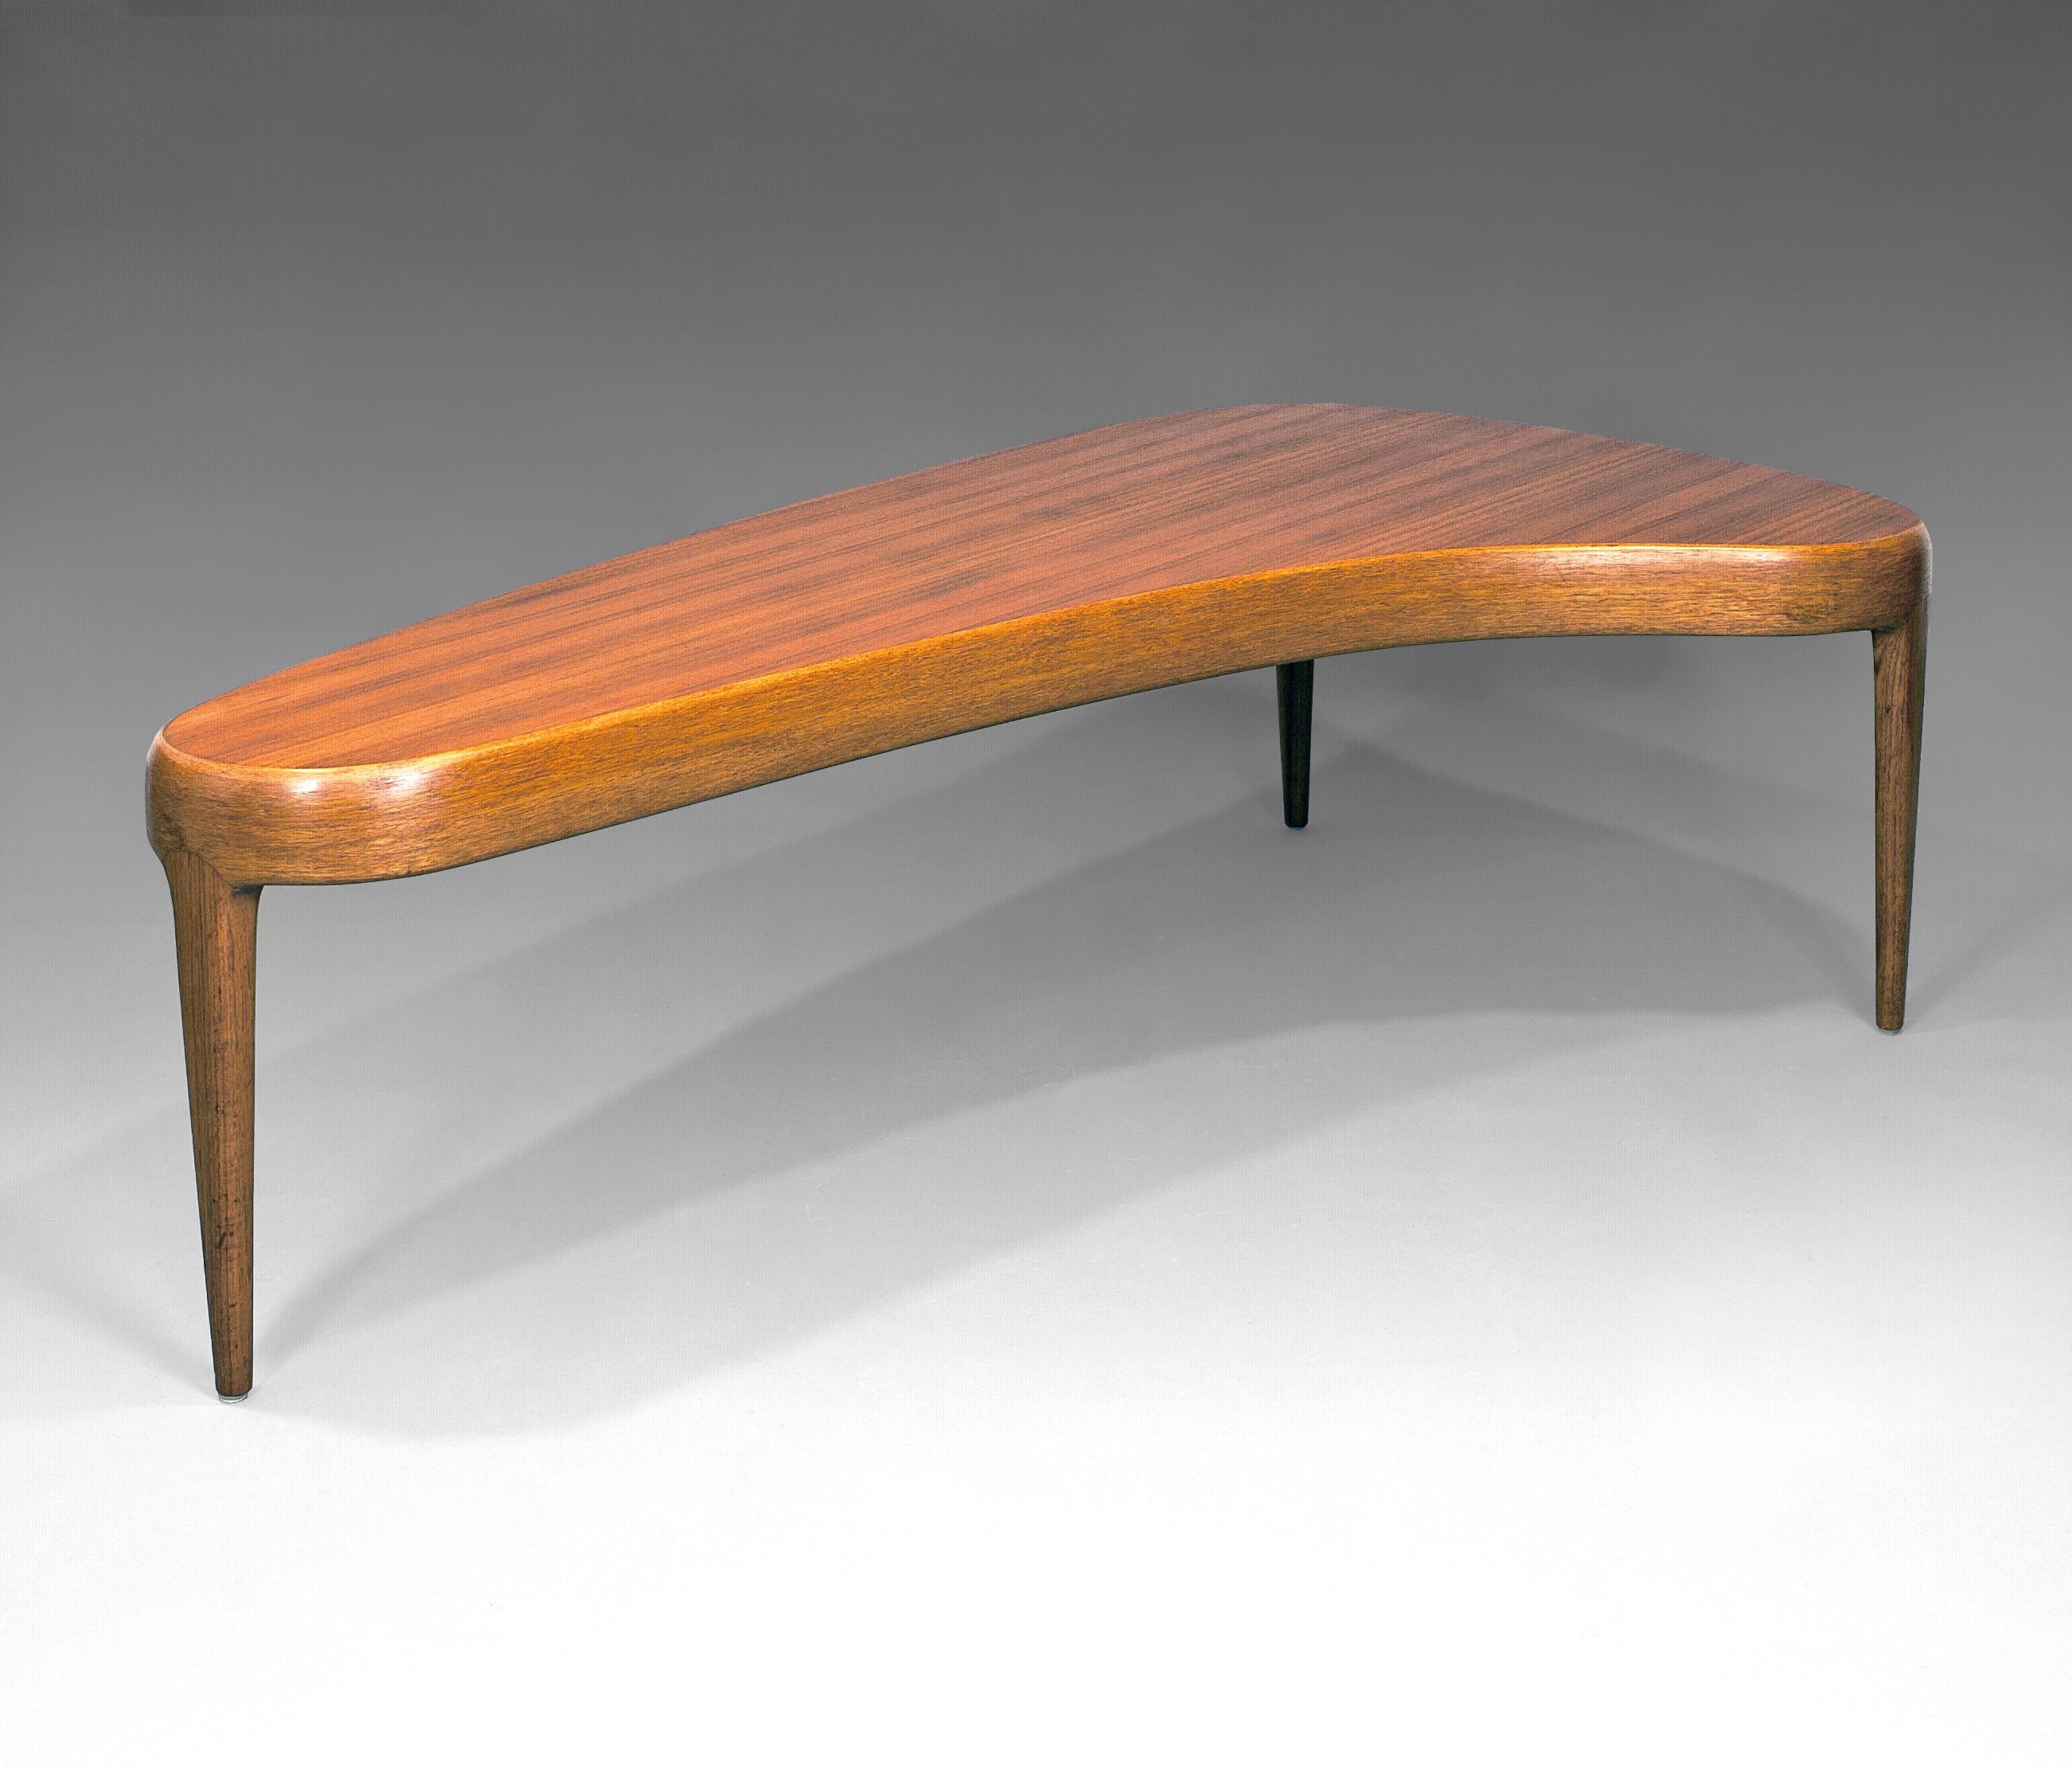 1950s kidney shaped coffee table